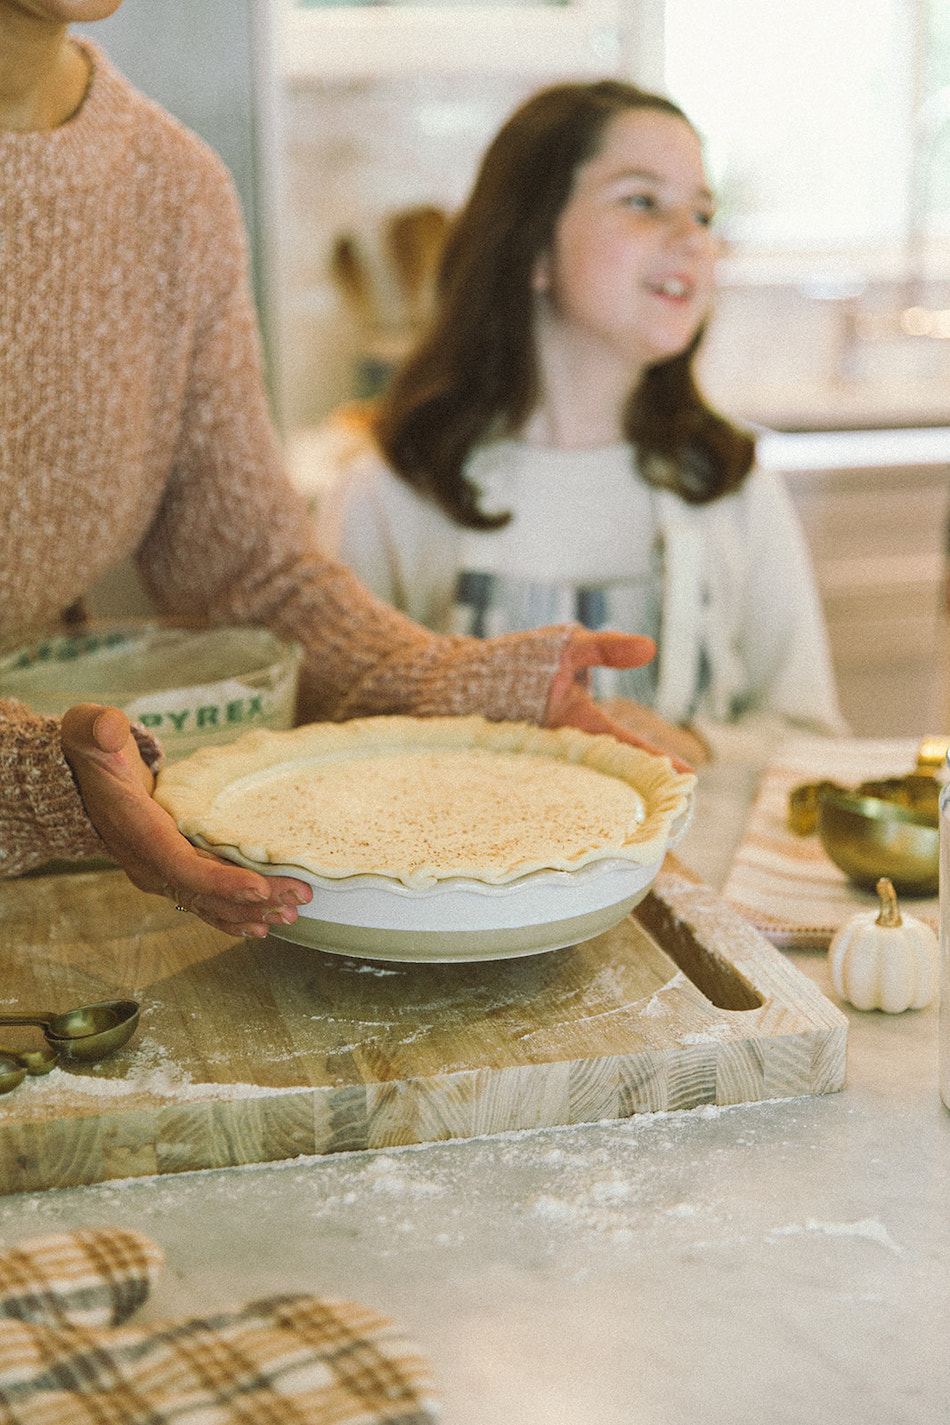 How to make fall pies for Thanksgiving - pie baking party - kitchen, cooking, fall baking